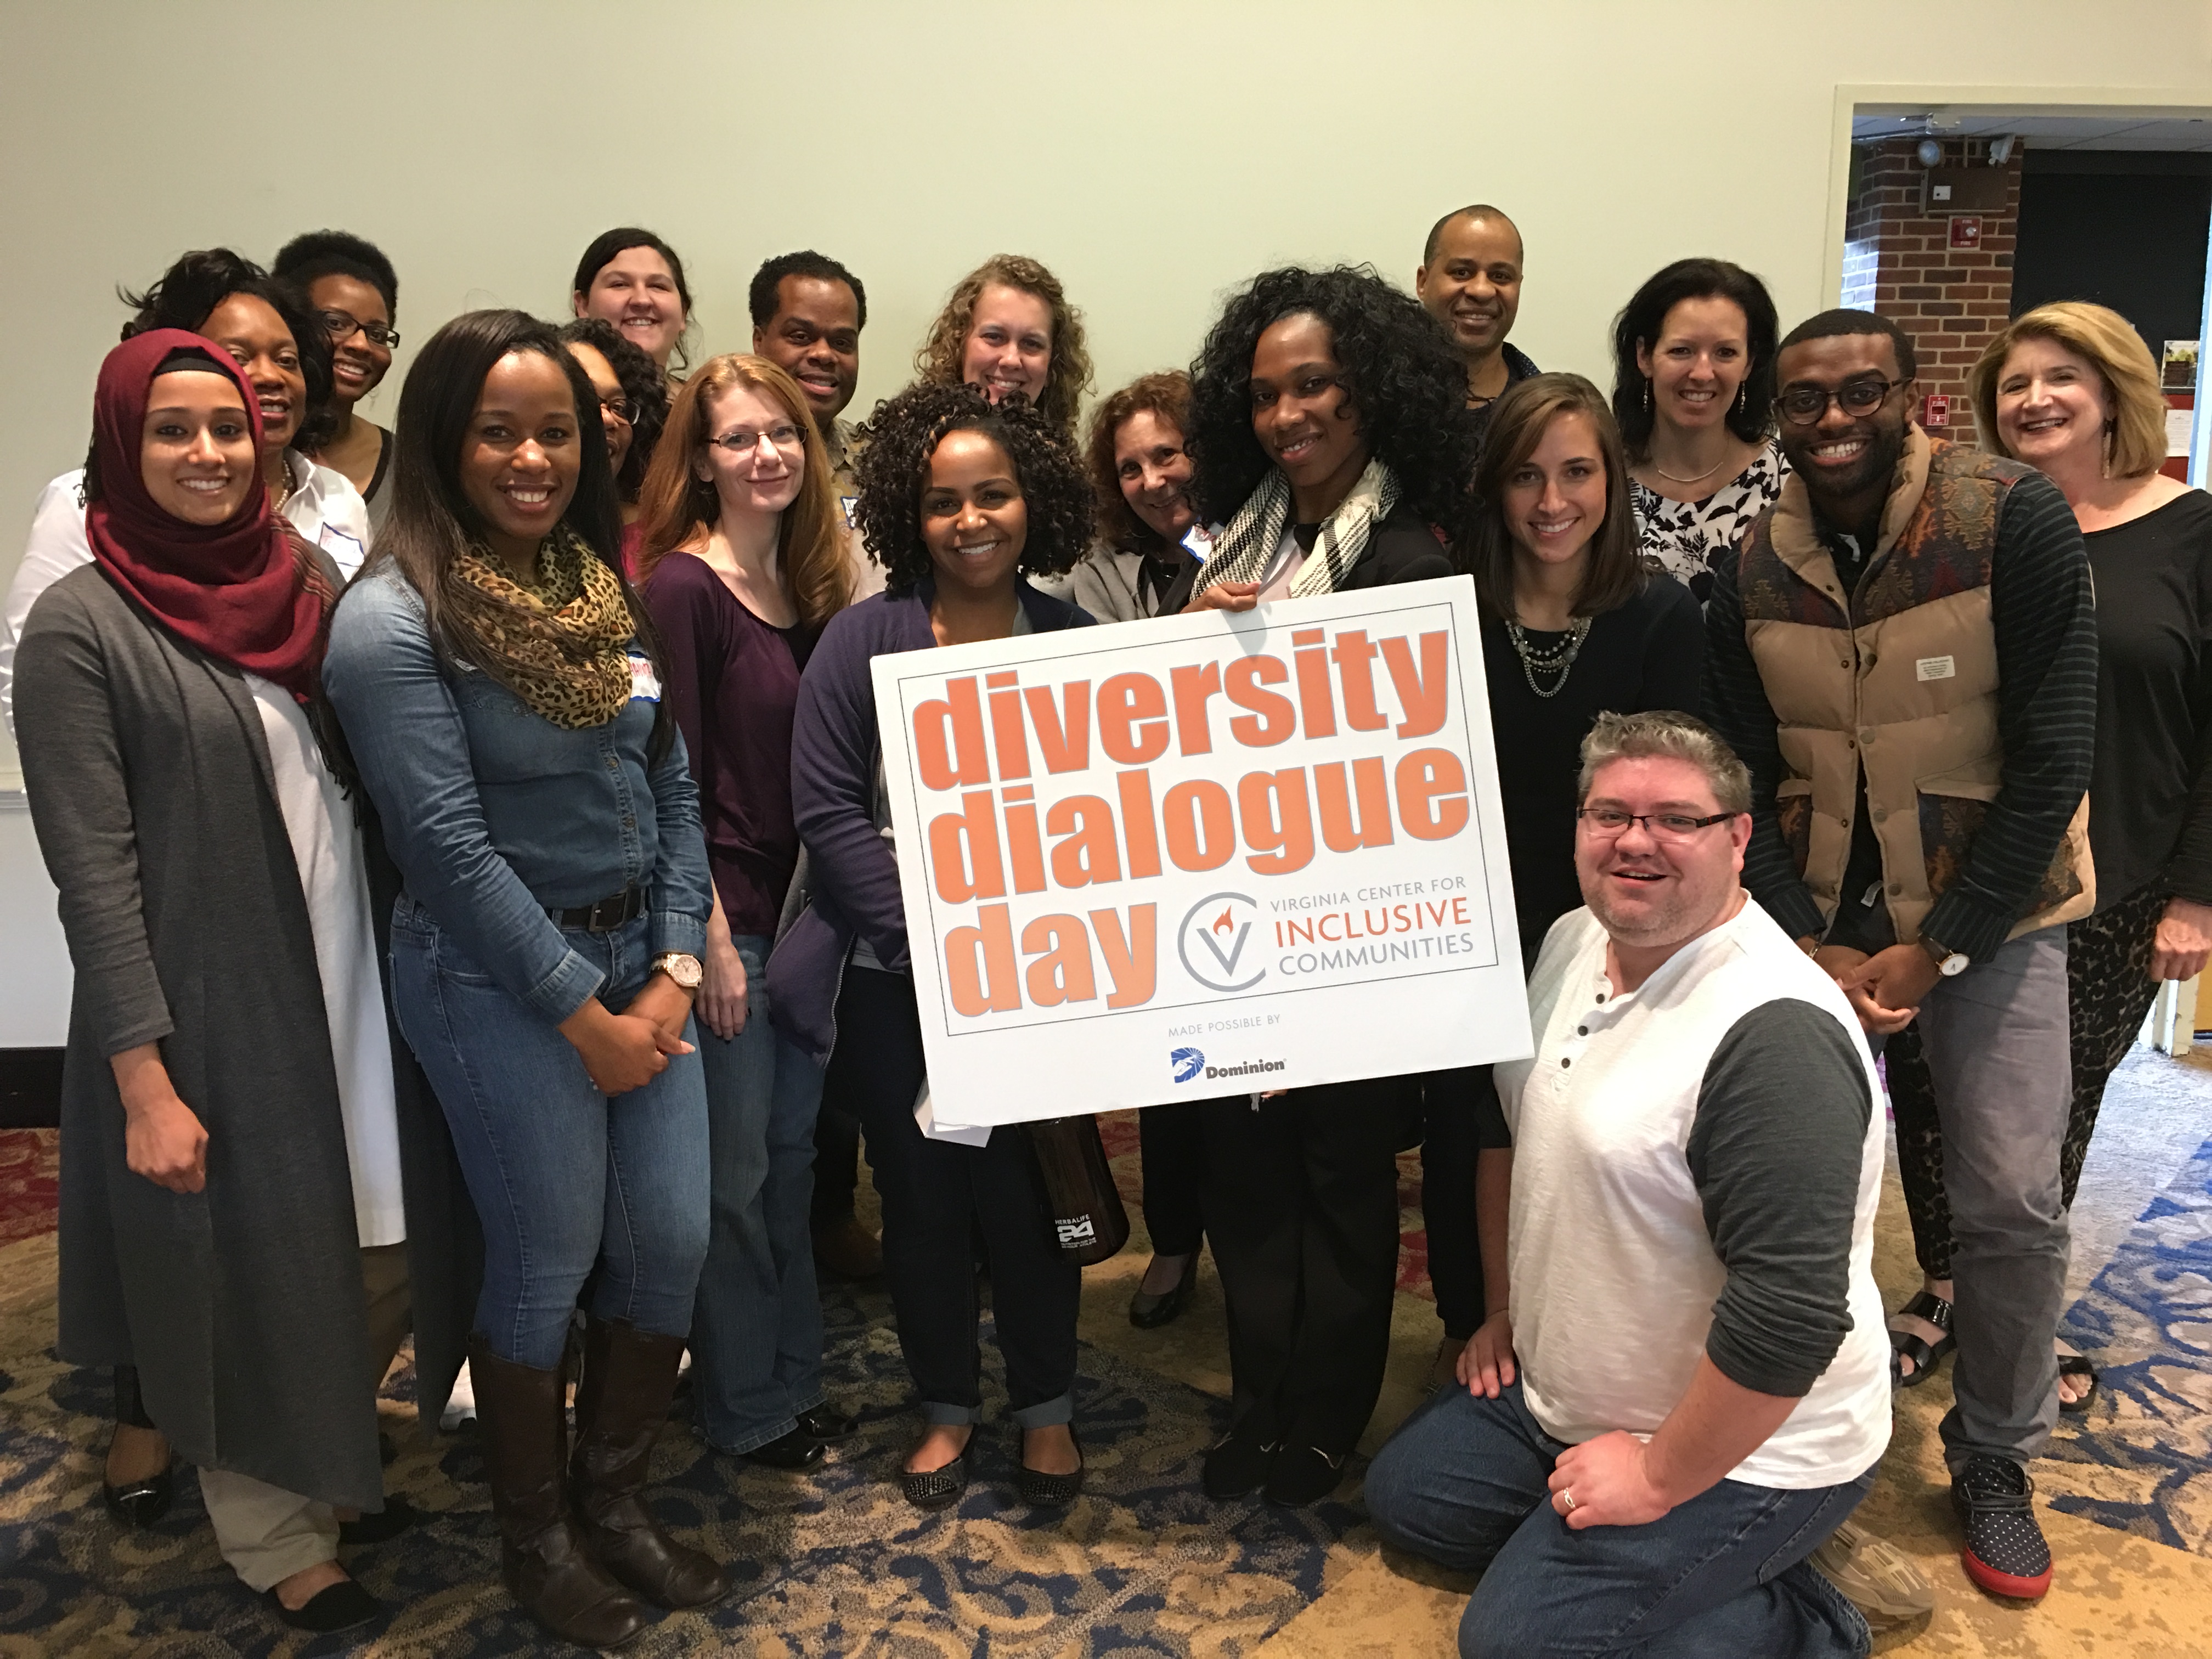 A diverse crowd of people are gathered together. They are smiling and posing while holding up a sign reading “diversity dialogue day”.